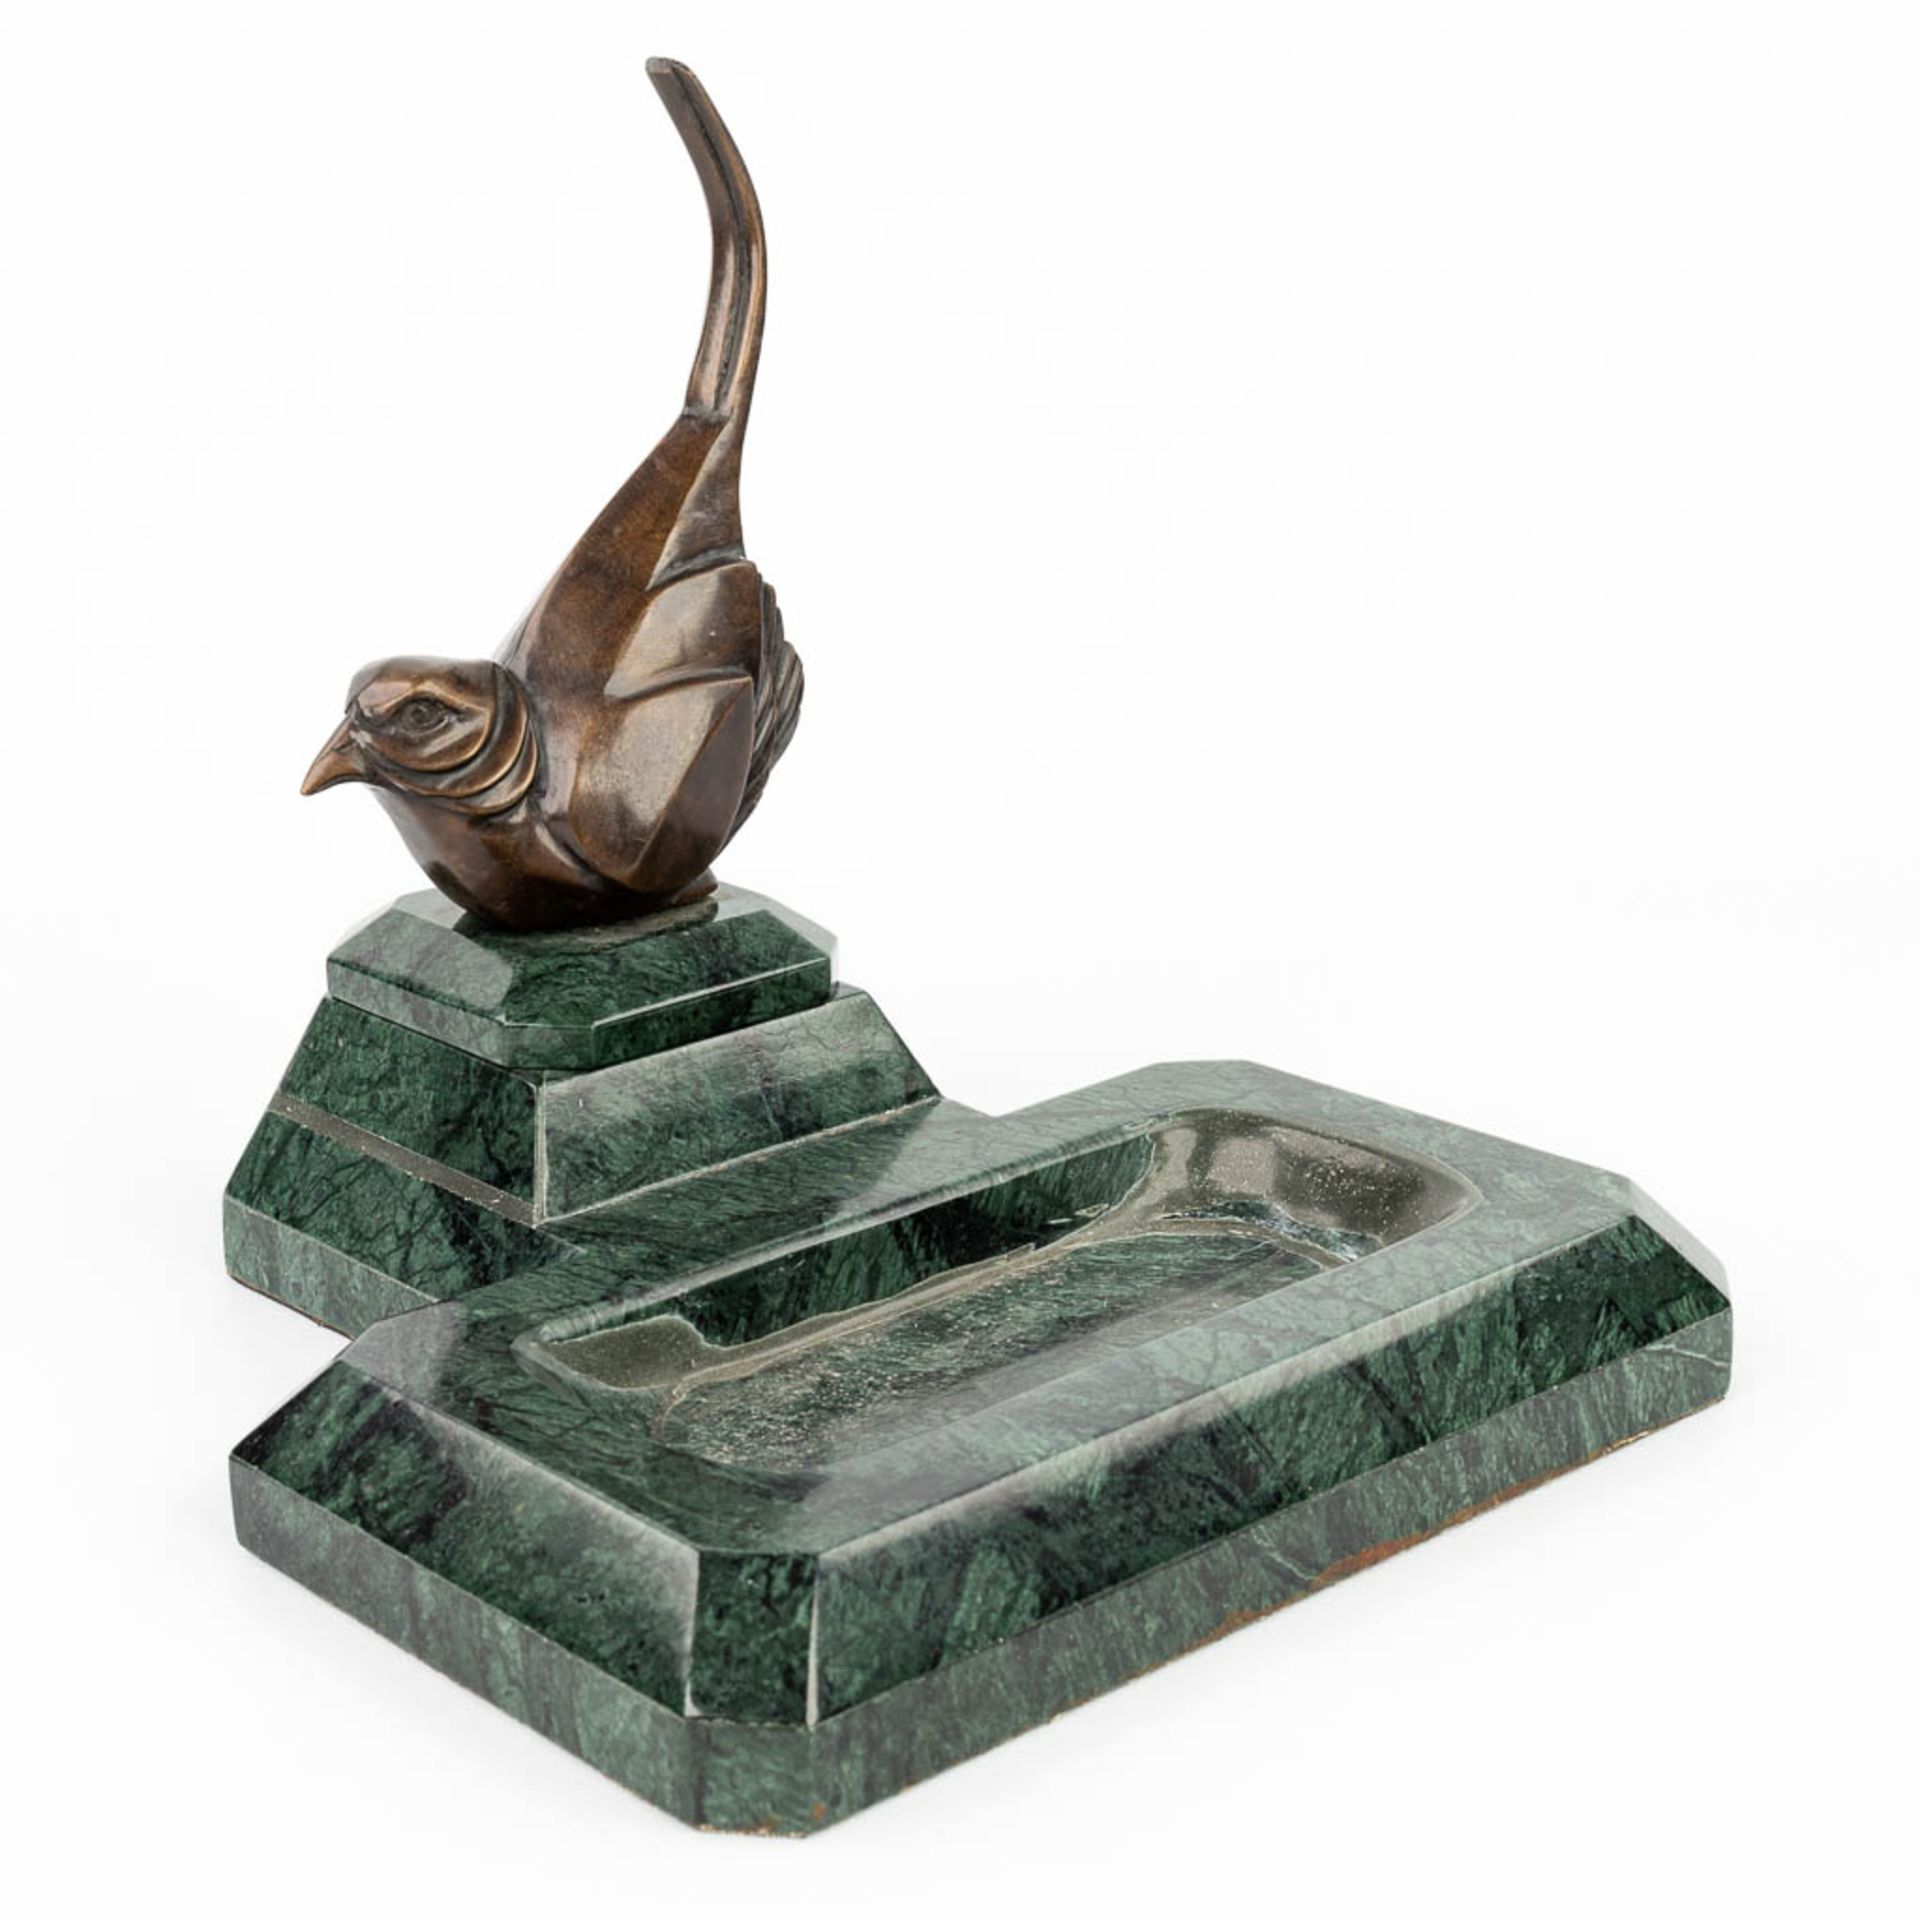 A 'Vide Poche' made of marble with a bird made of bronze in art deco style. - Image 6 of 10